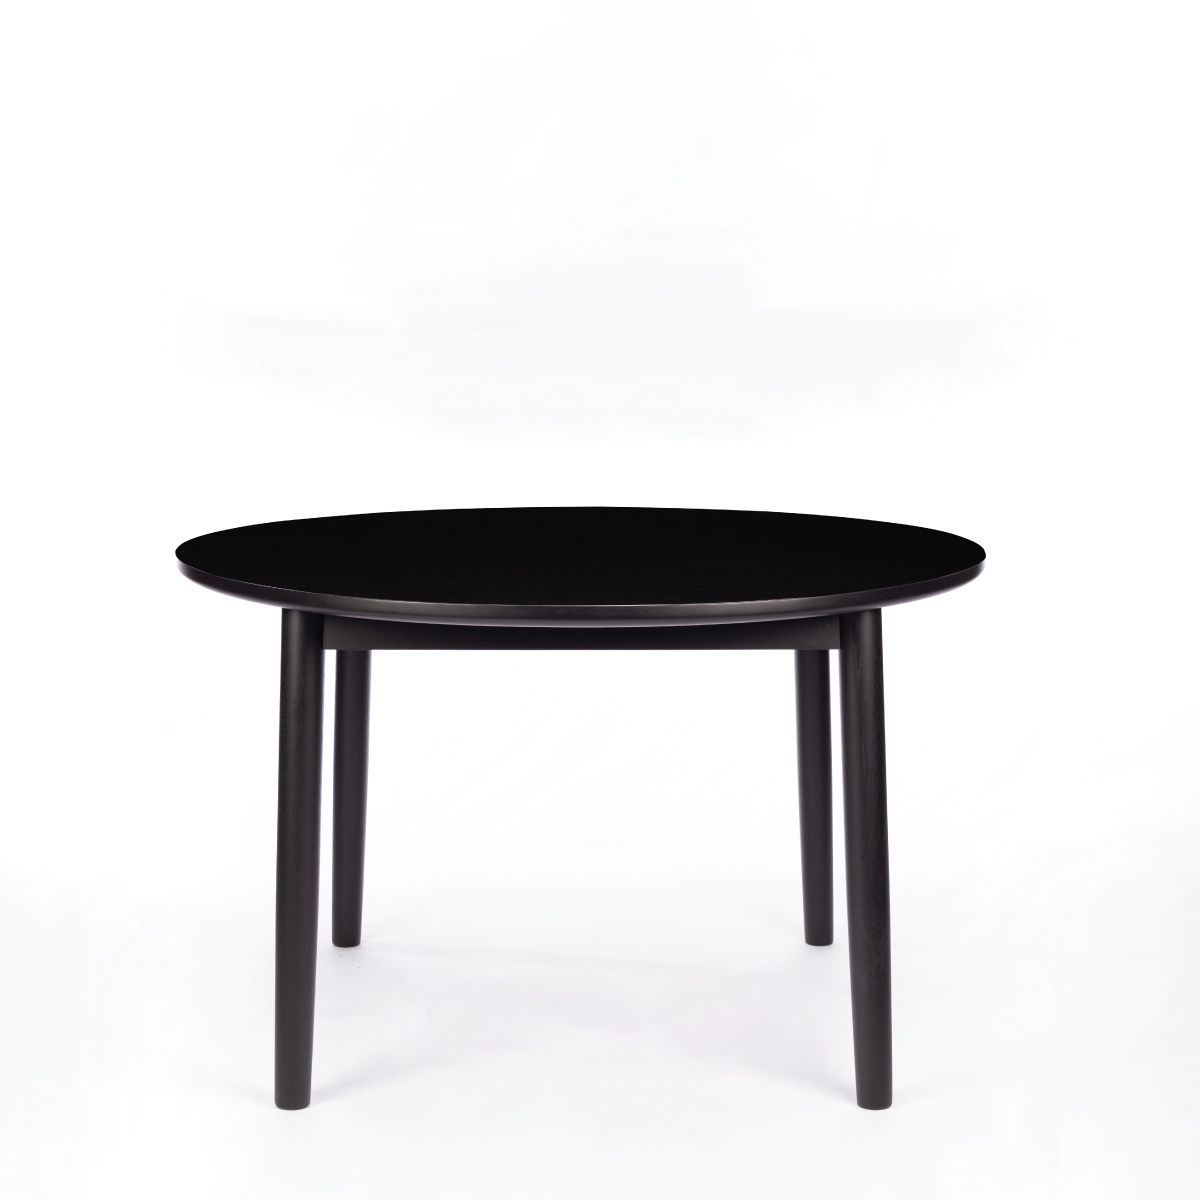 DT112 Cosmos Round Table